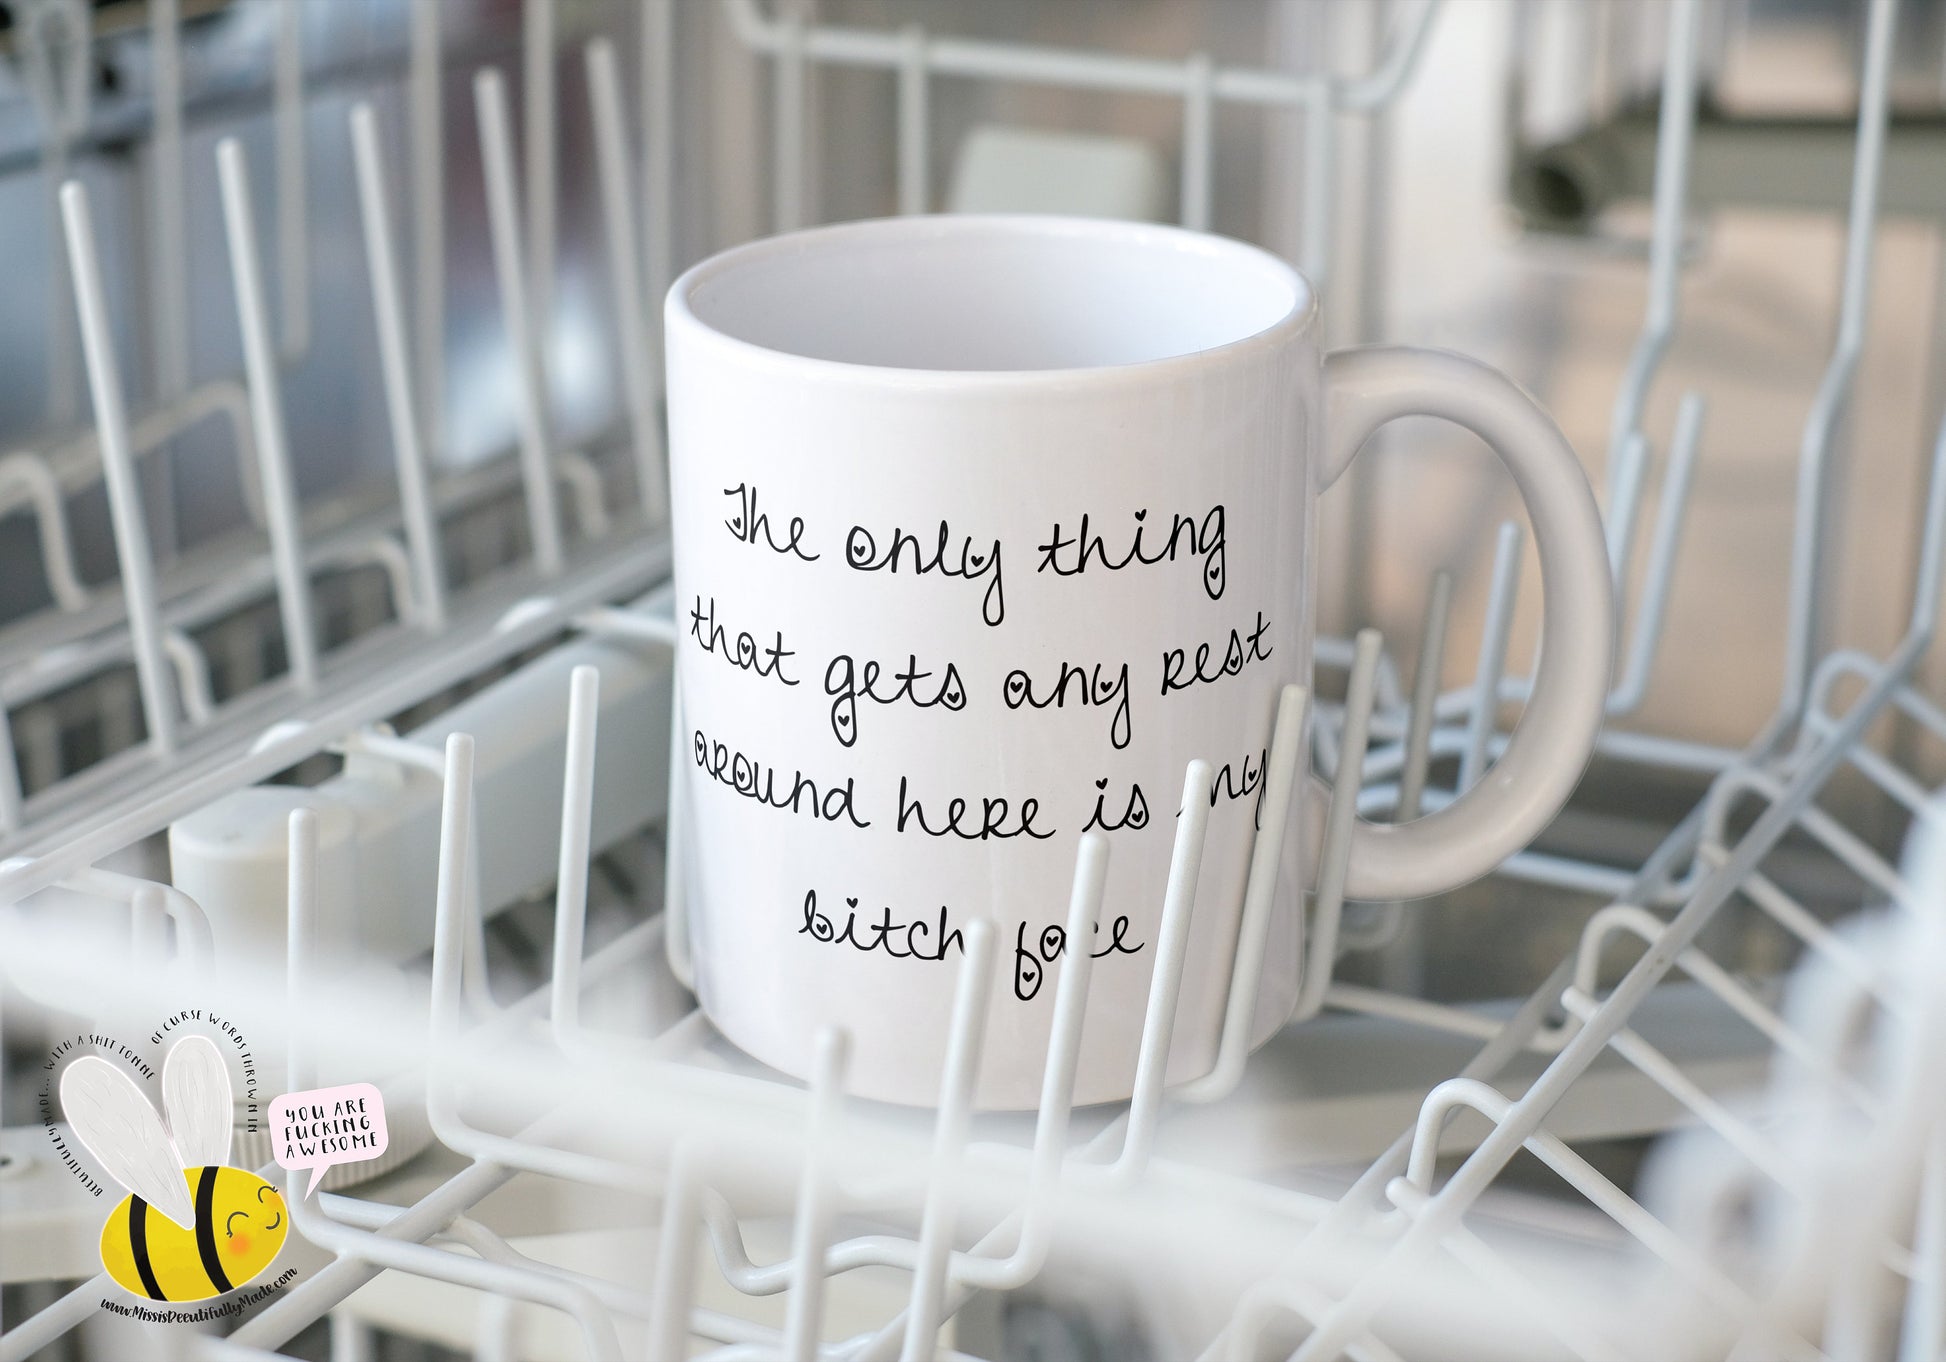 A white ceramic mug featuring the funny quote ‘ The only thing that gets any rest around here is my bitch face’. Printed in black ink.